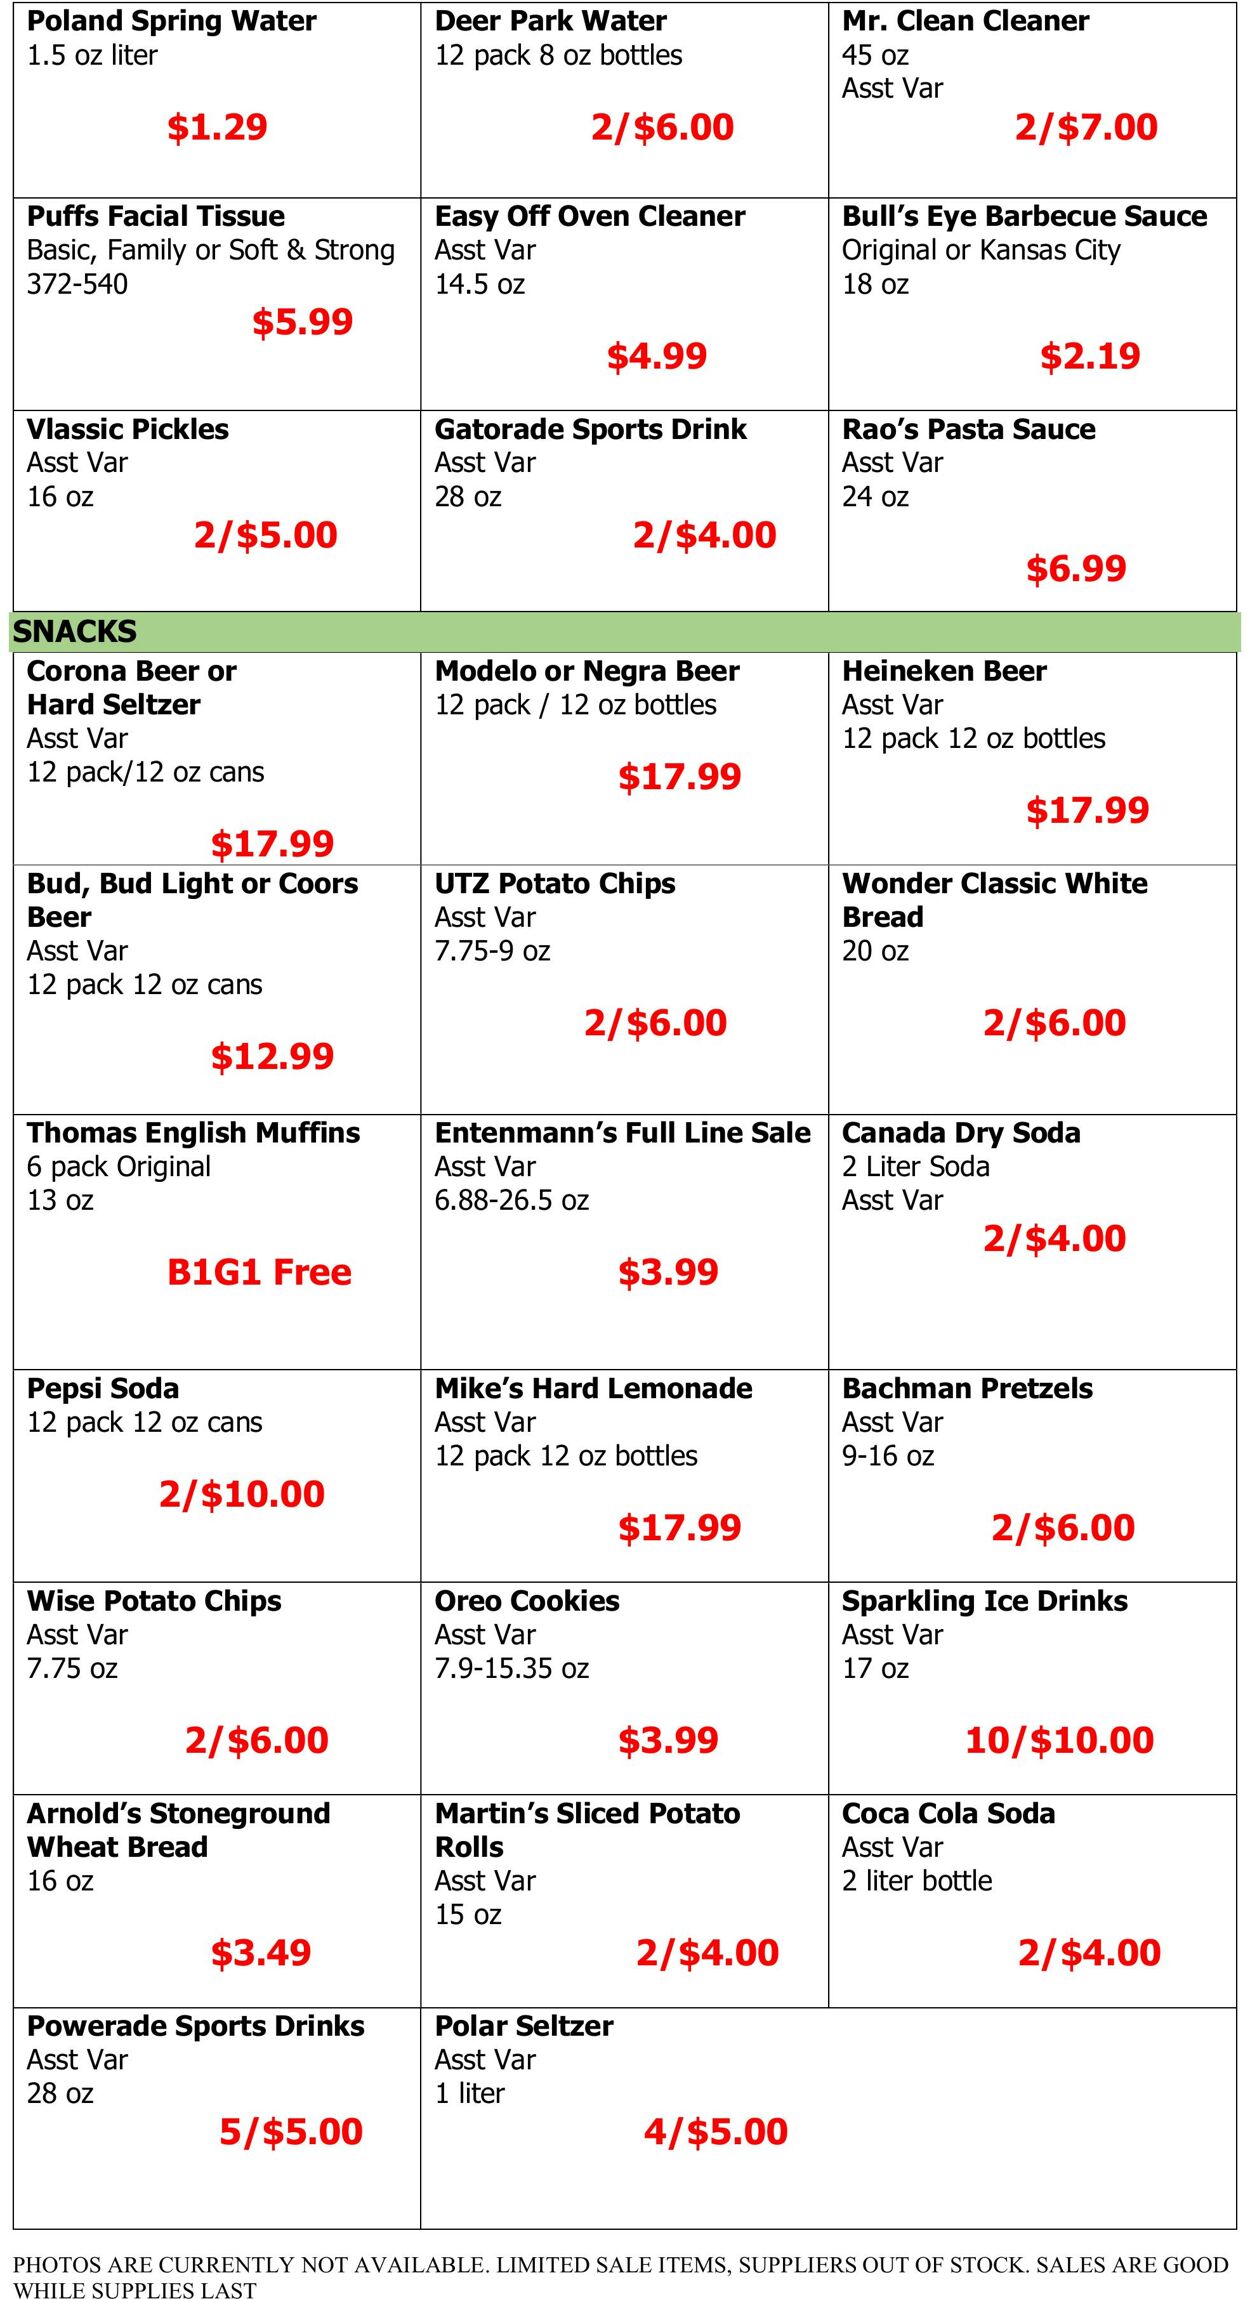 Weekly ad Country Markets of Westchester 08/12/2022 - 08/18/2022